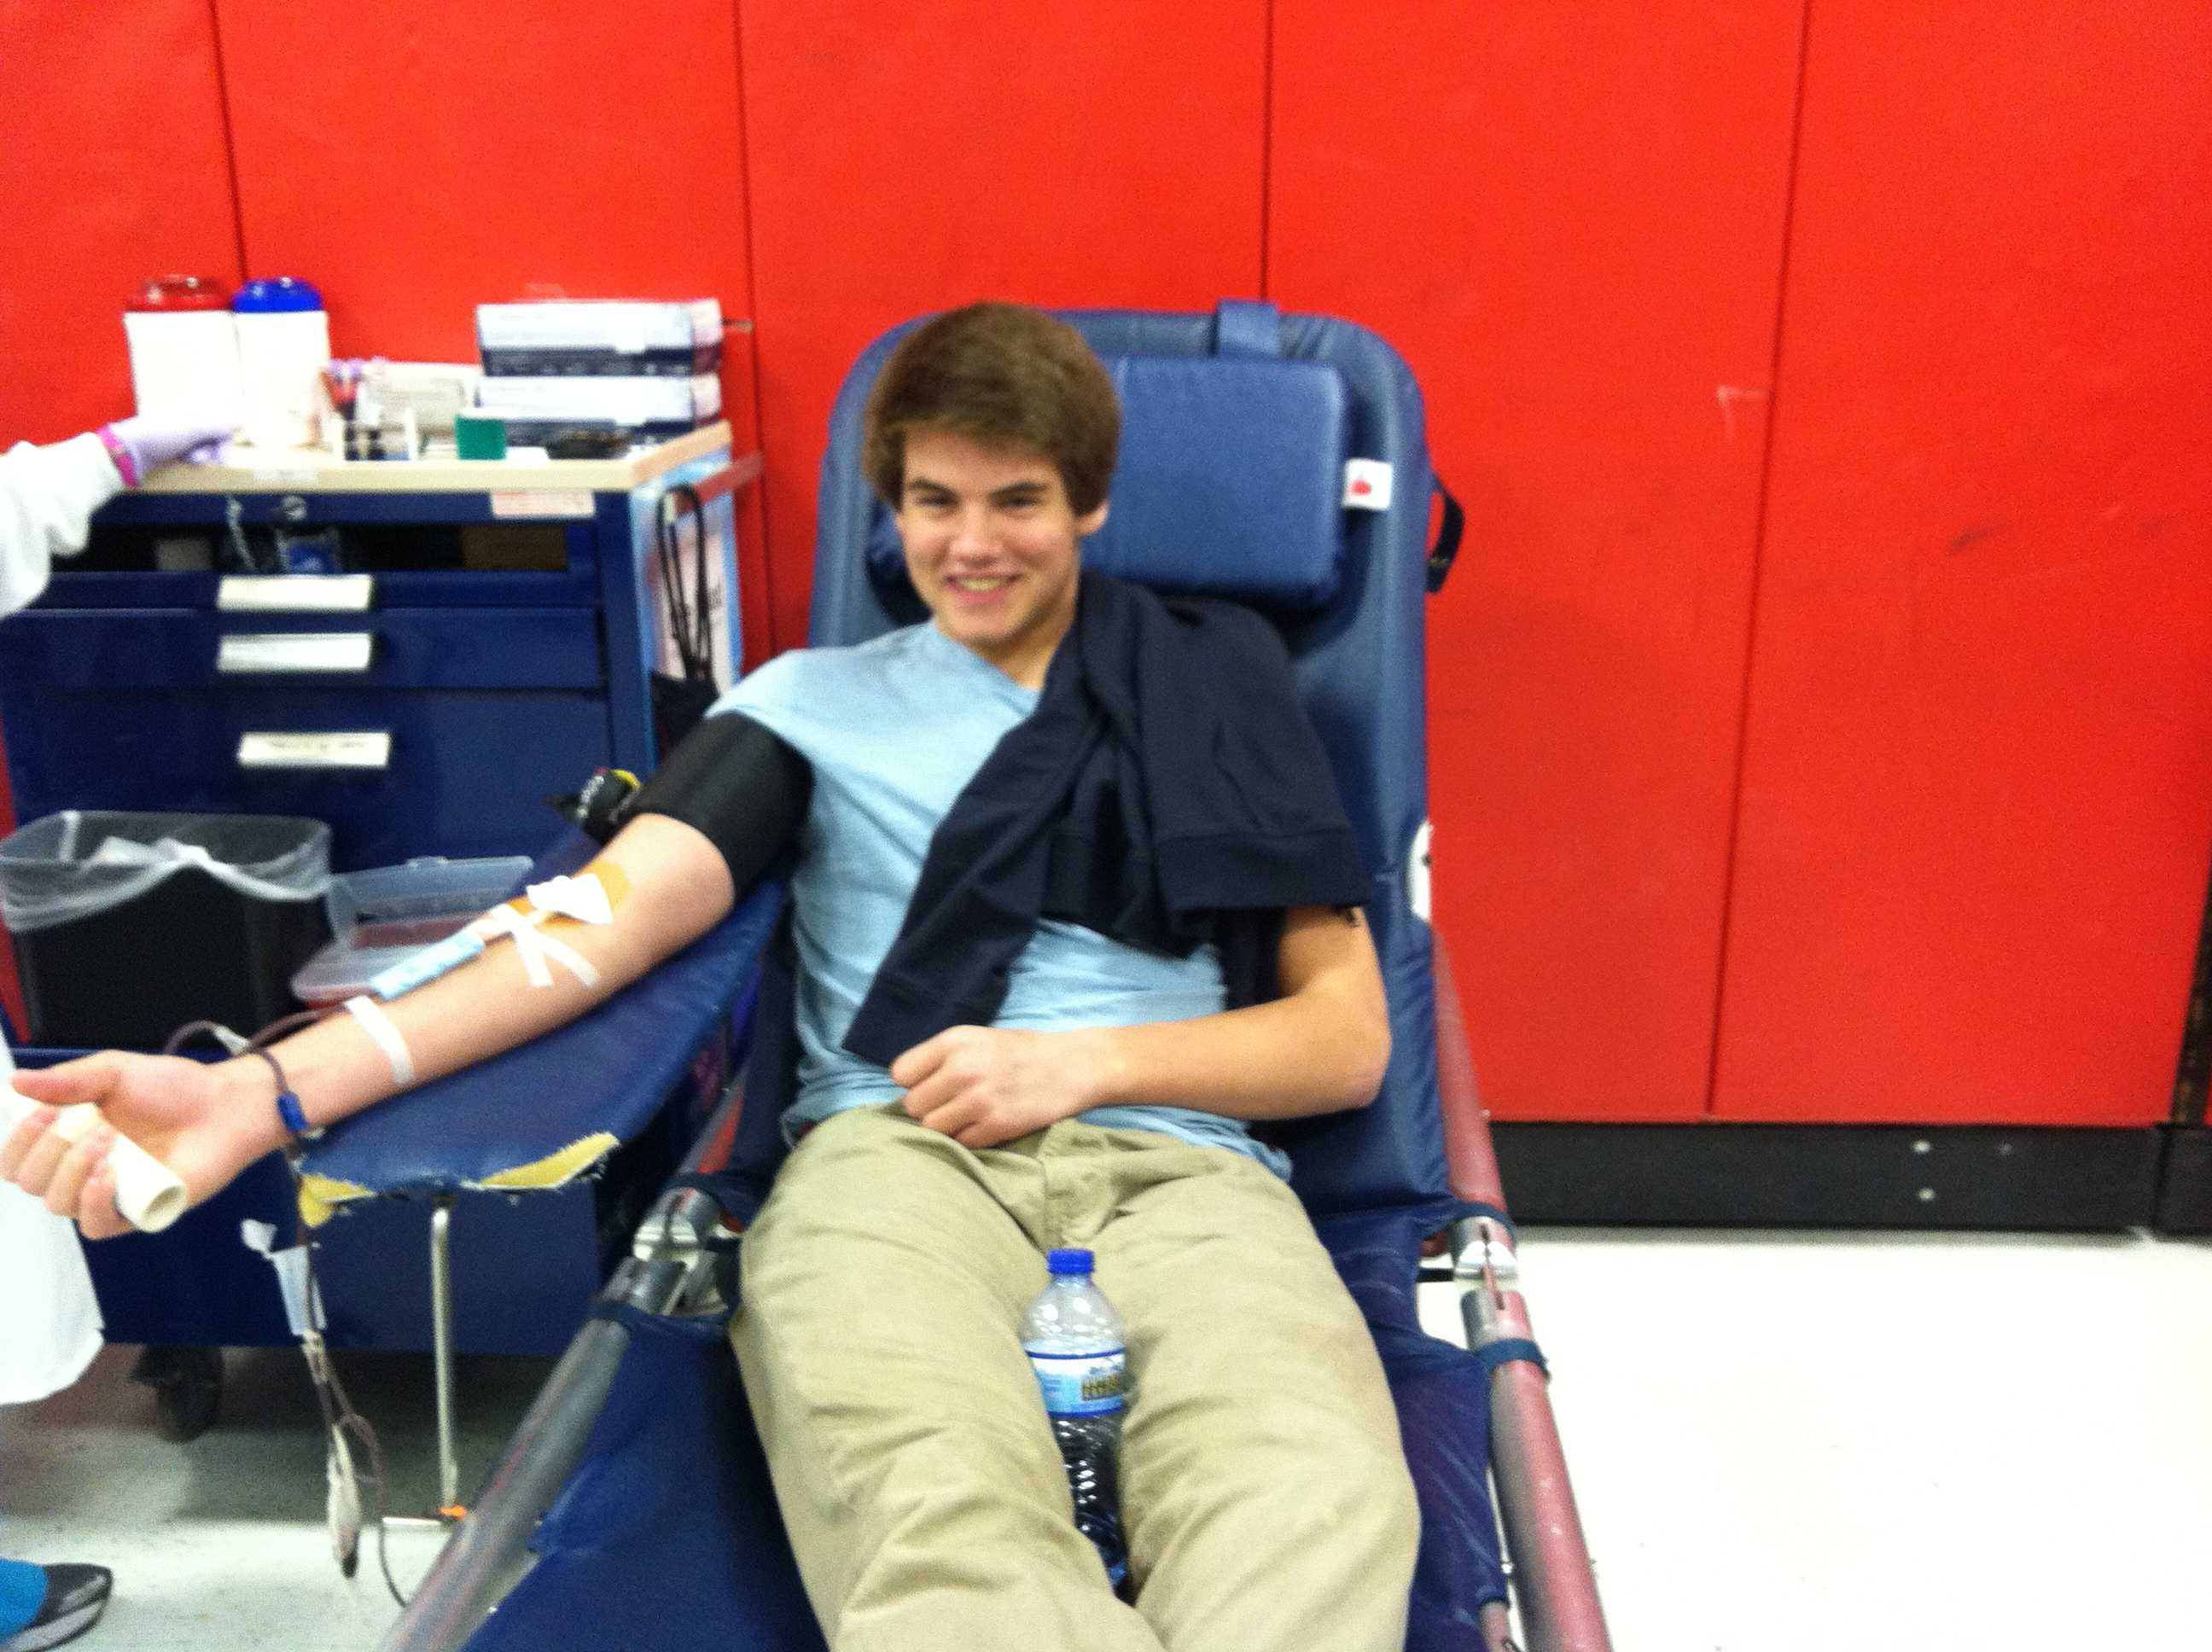 Senior Jake Anderson grins at the camera while giving blood.